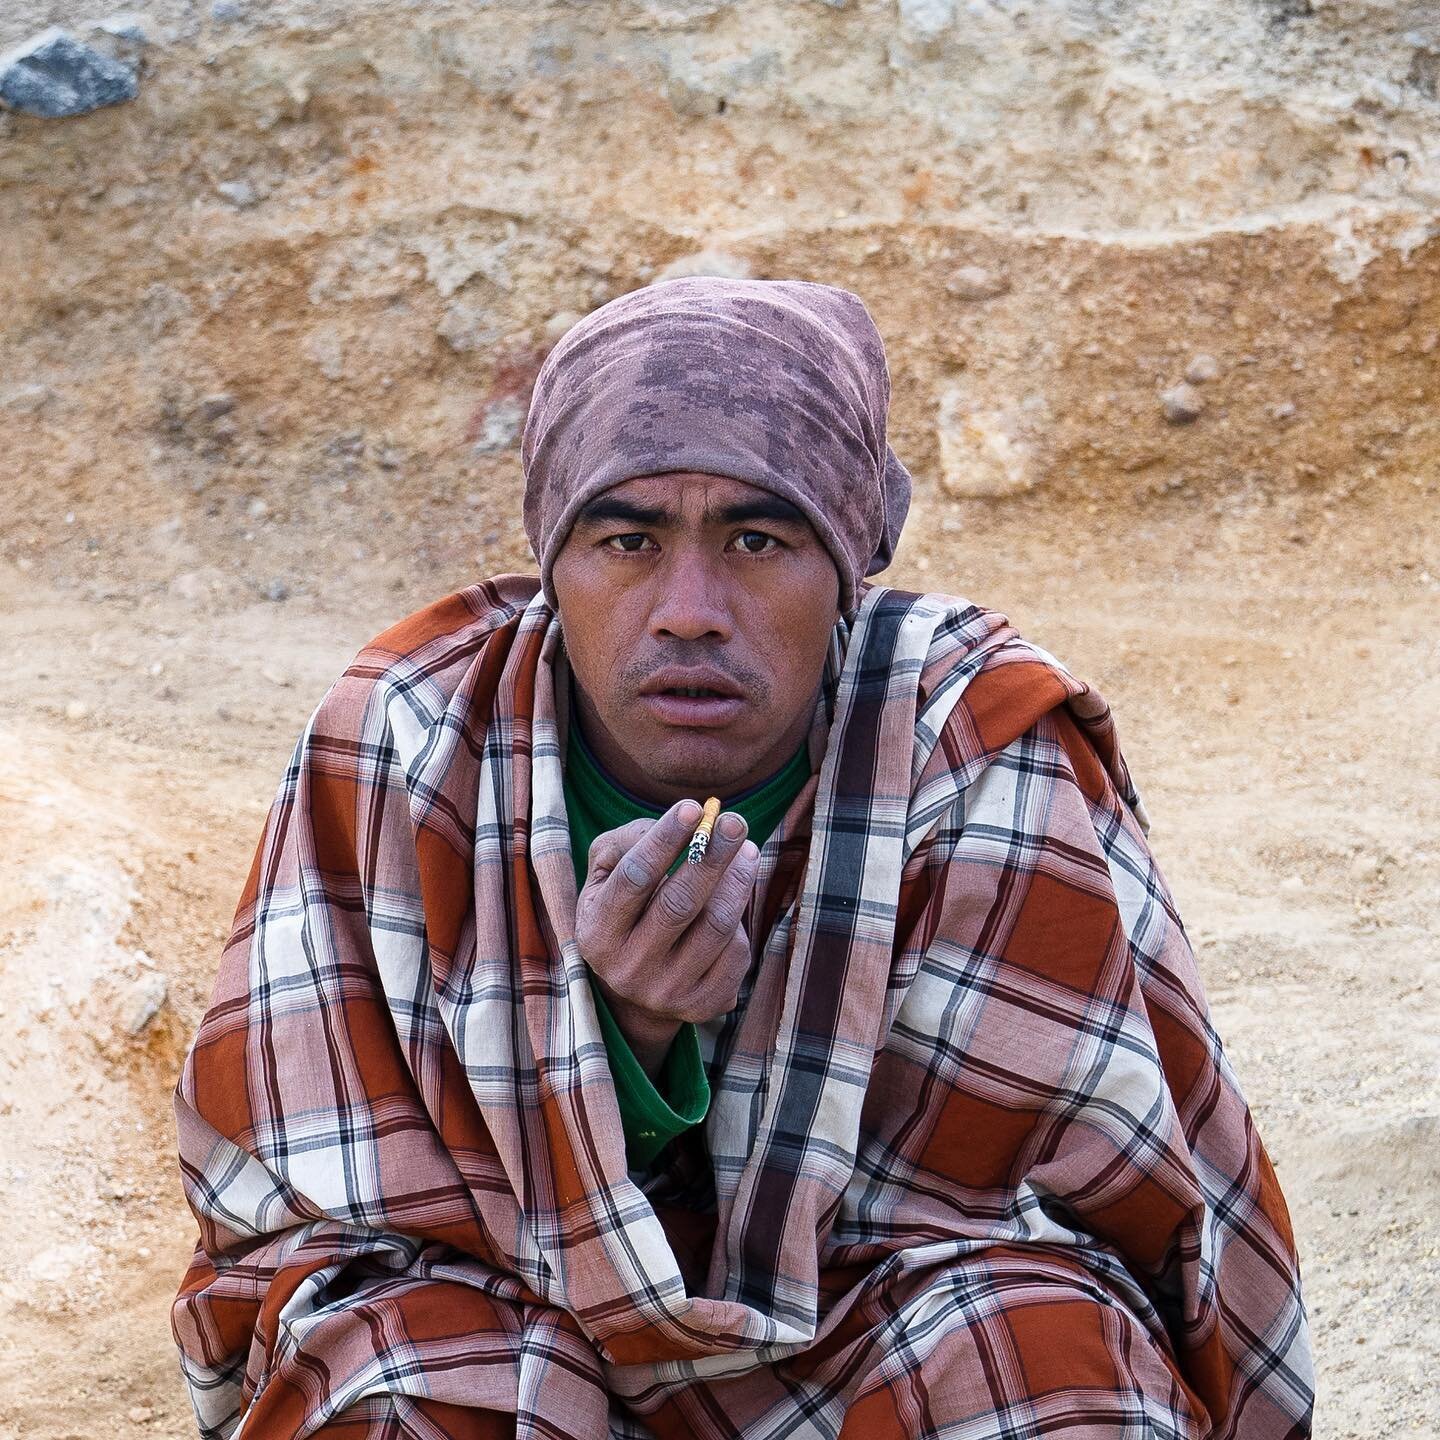 This is a local Indonesian sulfur miner. He gets paid based on the weight of sulfur he can carry, from deep inside the volcano crater approx half a mile up the rocky landscape. All the while burning his lungs from the sulfur gas and tears streaming d